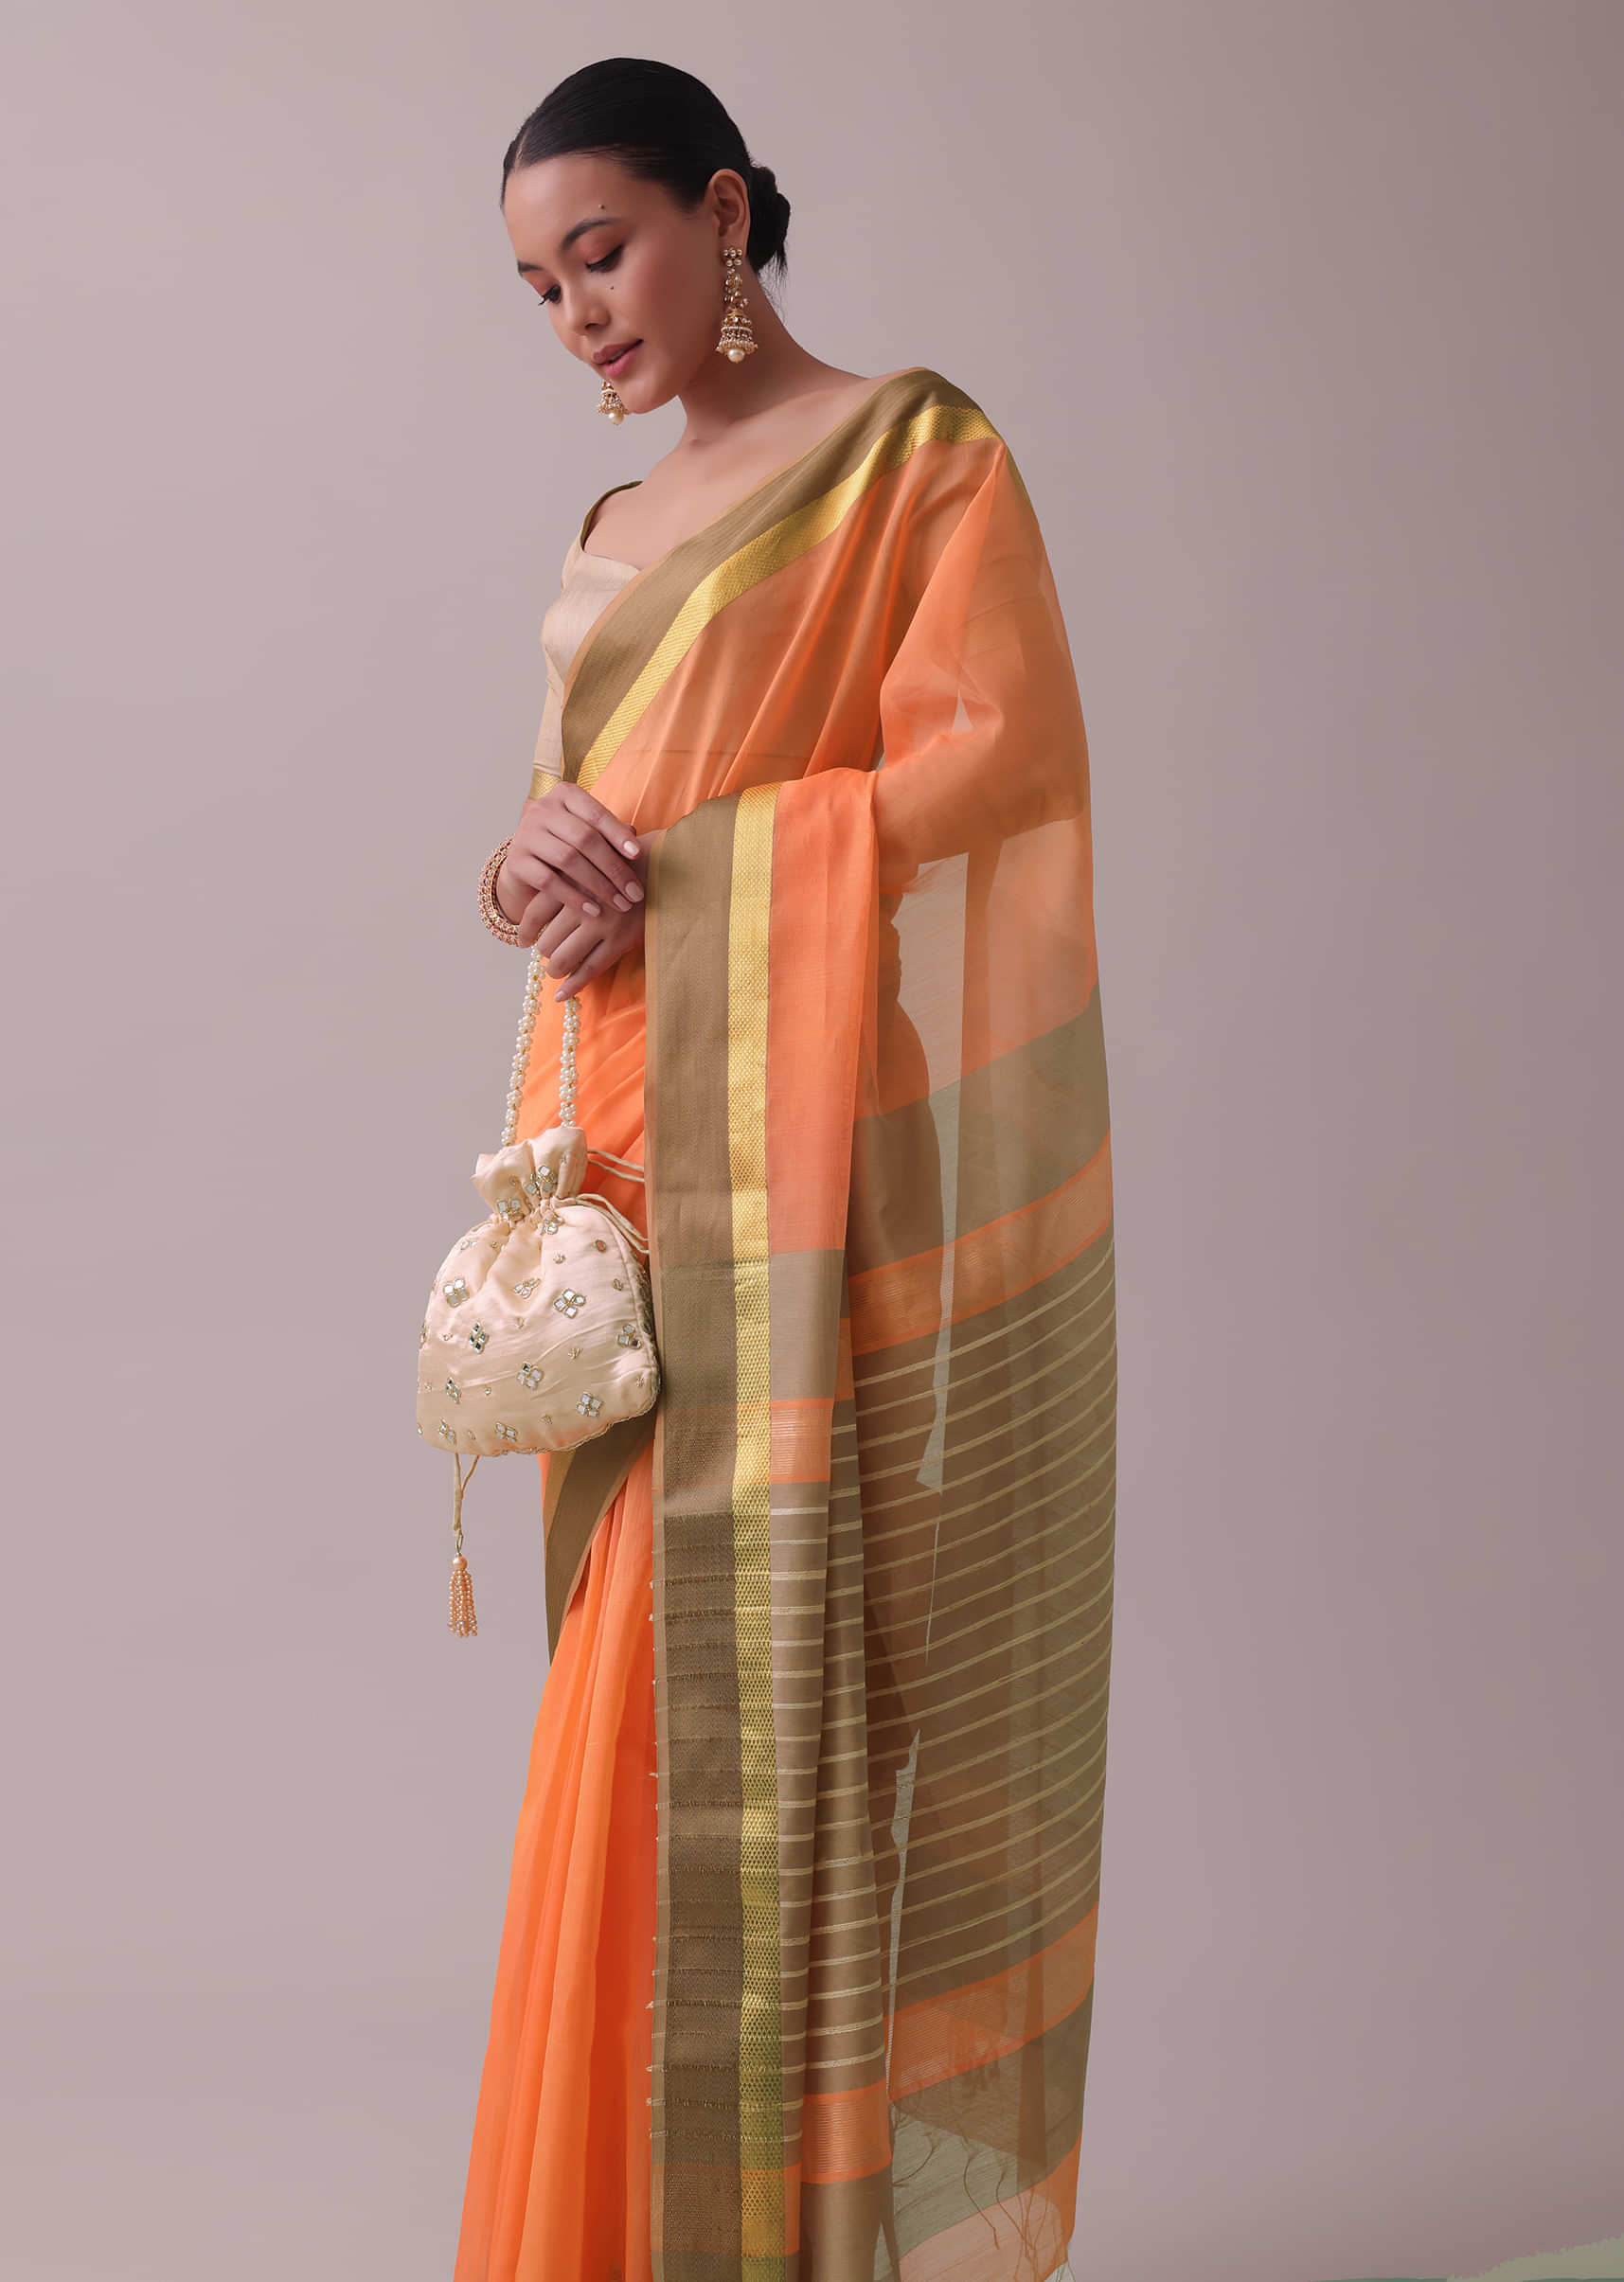 Buy Satin Saree Online in India at low prices - Snapdeal